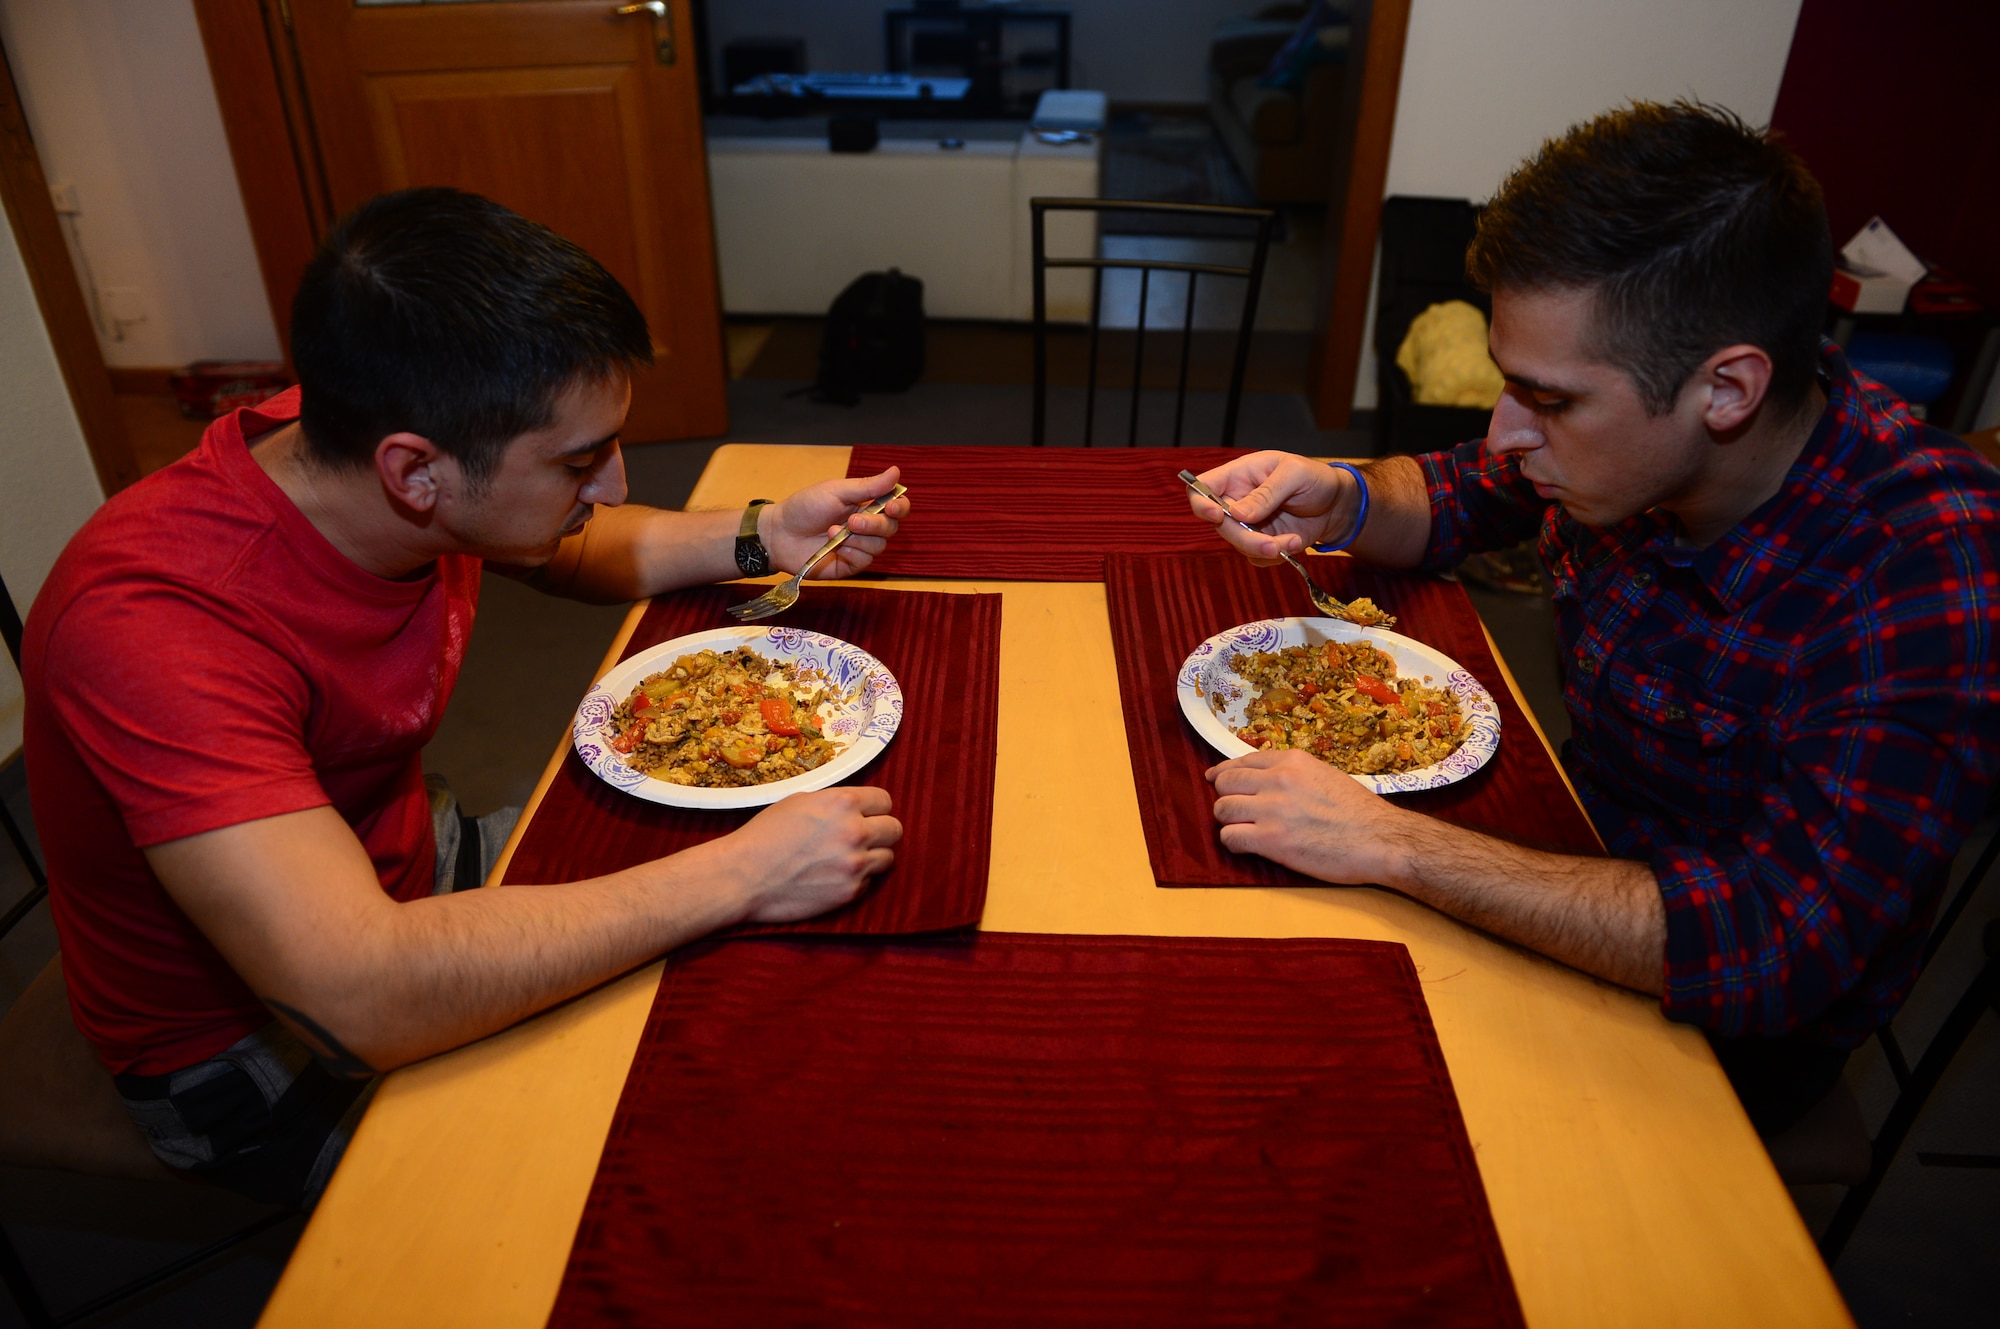 U.S. Air Force Senior Airman Edward Lomelin, 606th Air Control Squadron radio frequencies transmission systems technician and native of Austin, Texas, and U.S. Air Force Airman 1st Class Chris Lomelin, 606th ACS power production technician and native of Austin, Texas, eat dinner together at their home in Bitburg, Germany, Oct. 1, 2014. Edward, Chris’ older brother, helped to prepare Chris for his first deployment to Southwest Asia. This will be Edward’s fourth deployment. (U.S. Air Force photo by Airman 1st Class Kyle Gese/Released)